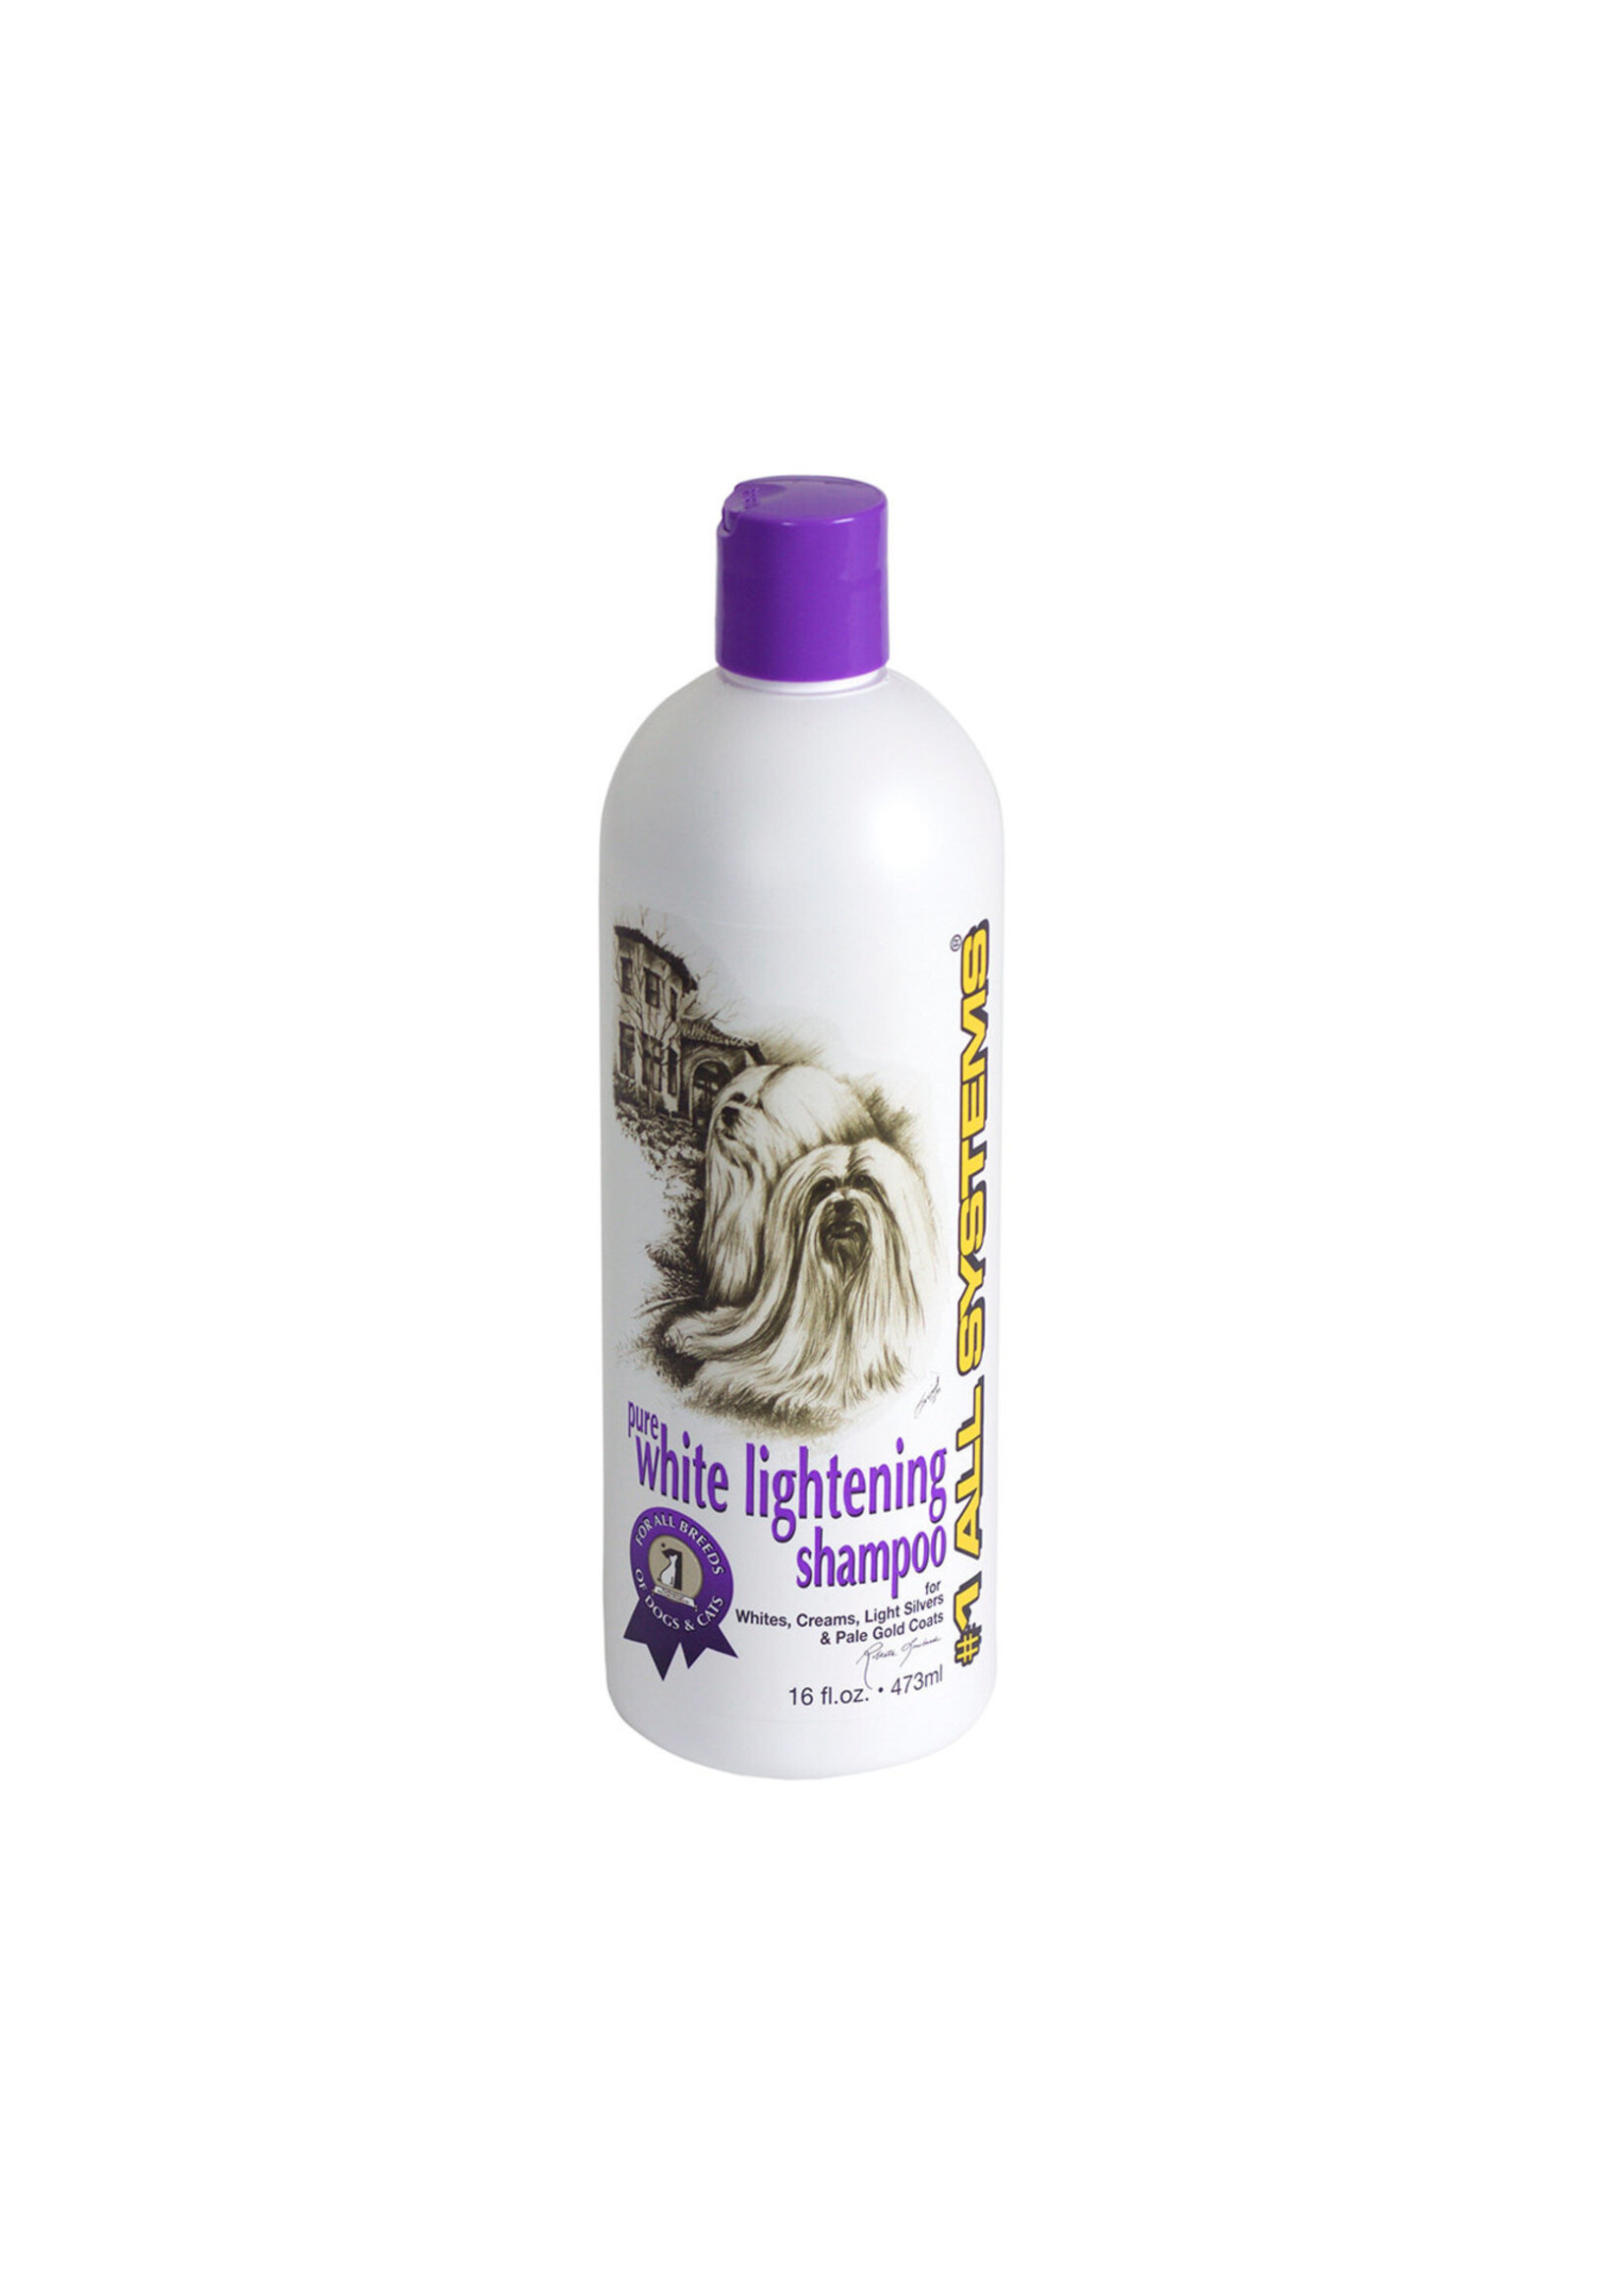 #1 All Systems #1 All Systems Pure White Lightening Shampoo